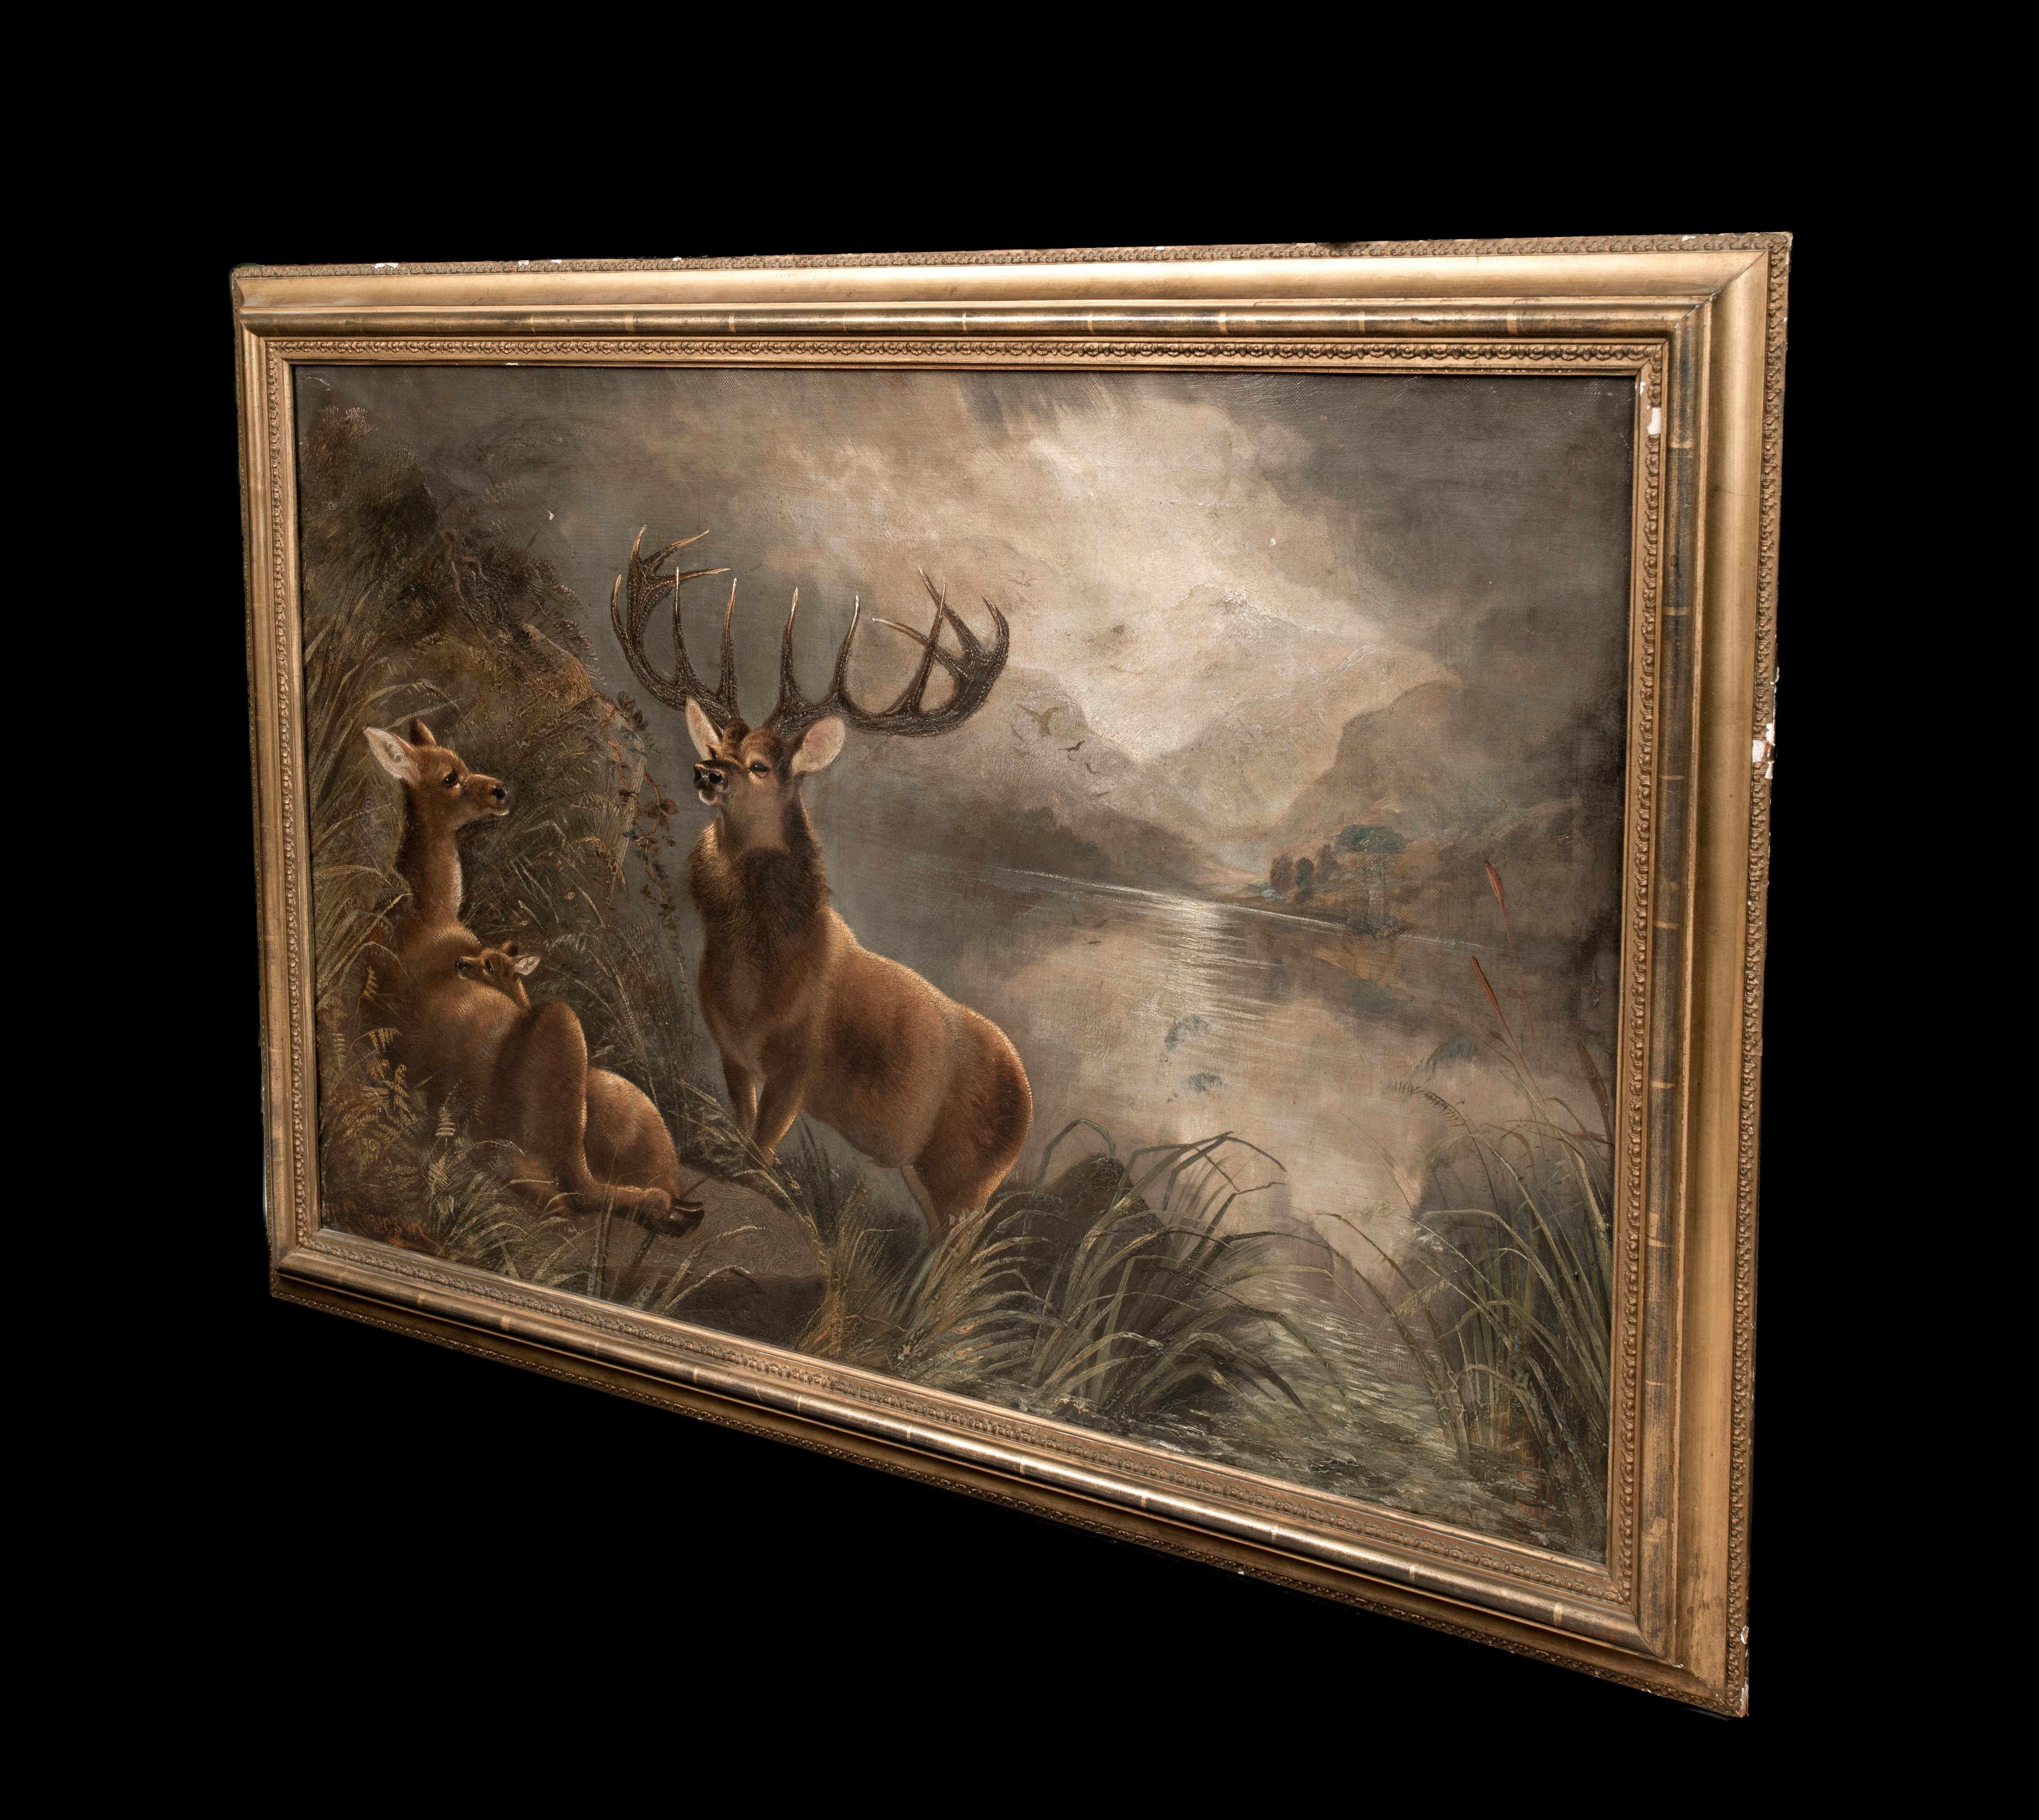 The Monarch of The Glen At Moonlight, 19th Century  by Robert Cleminson  8